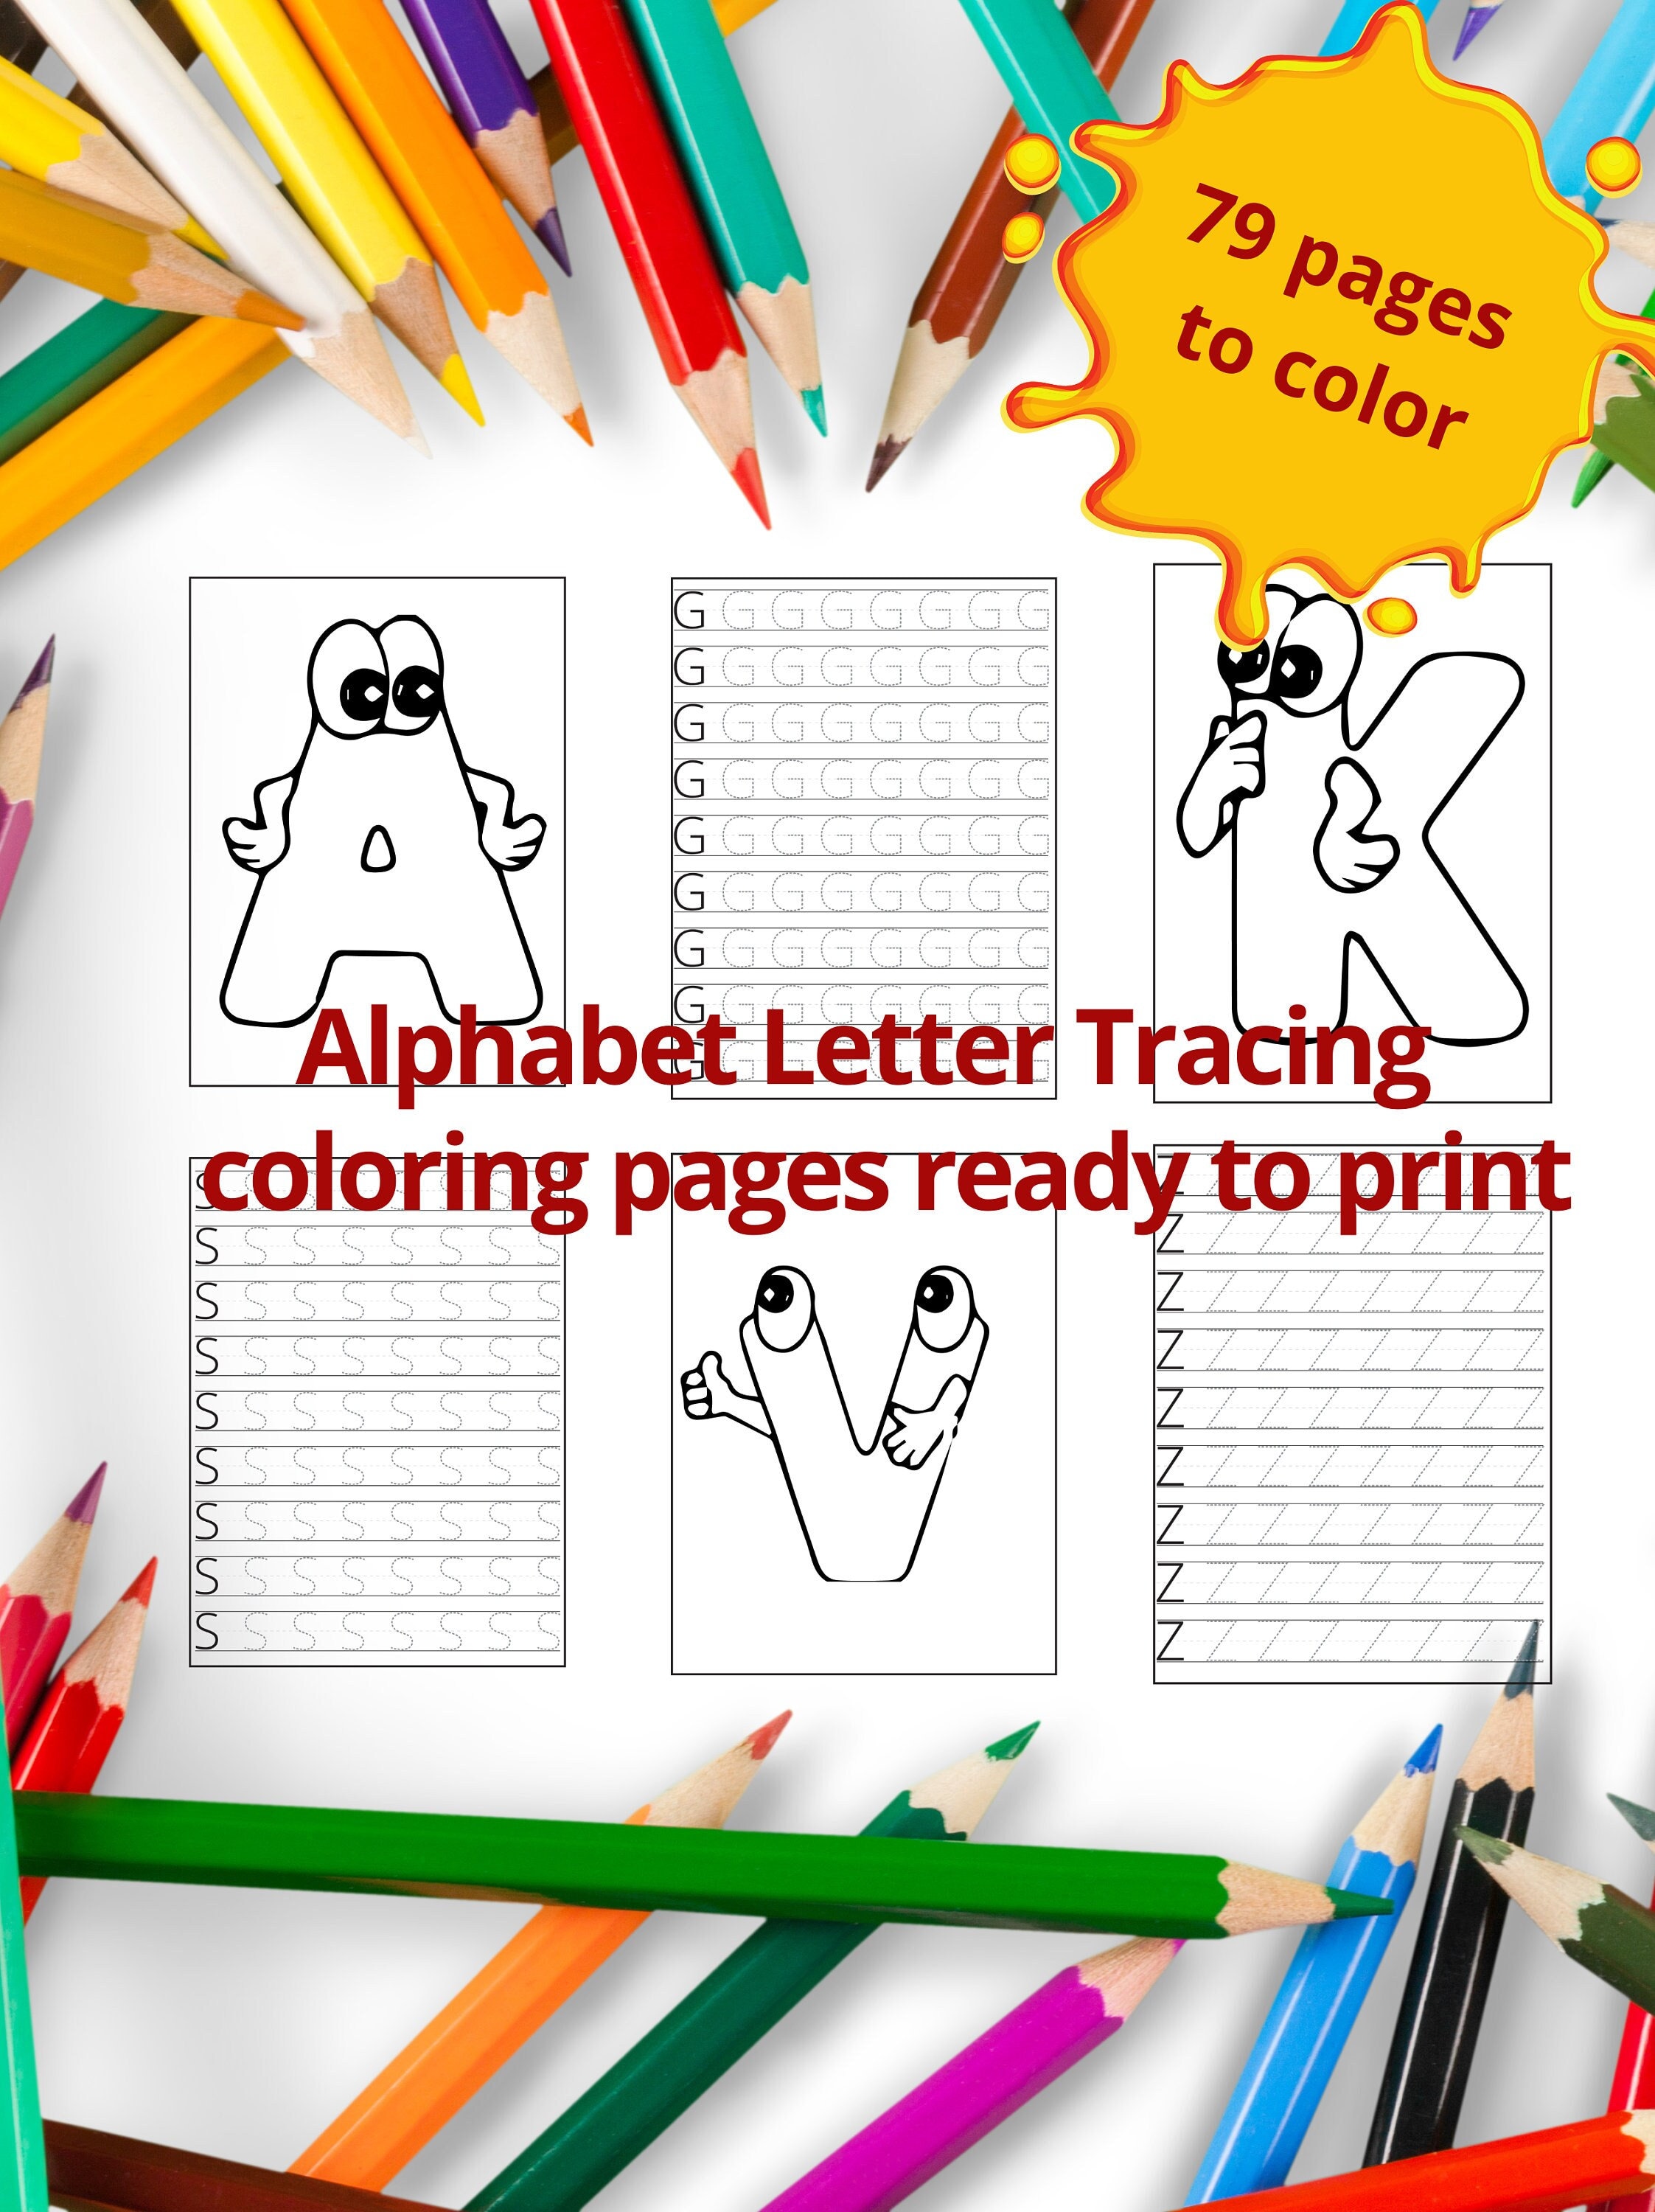 Kids coloring pages printable coloring book for kids alphabet letter tracing workbook children coloring sheets pdf download